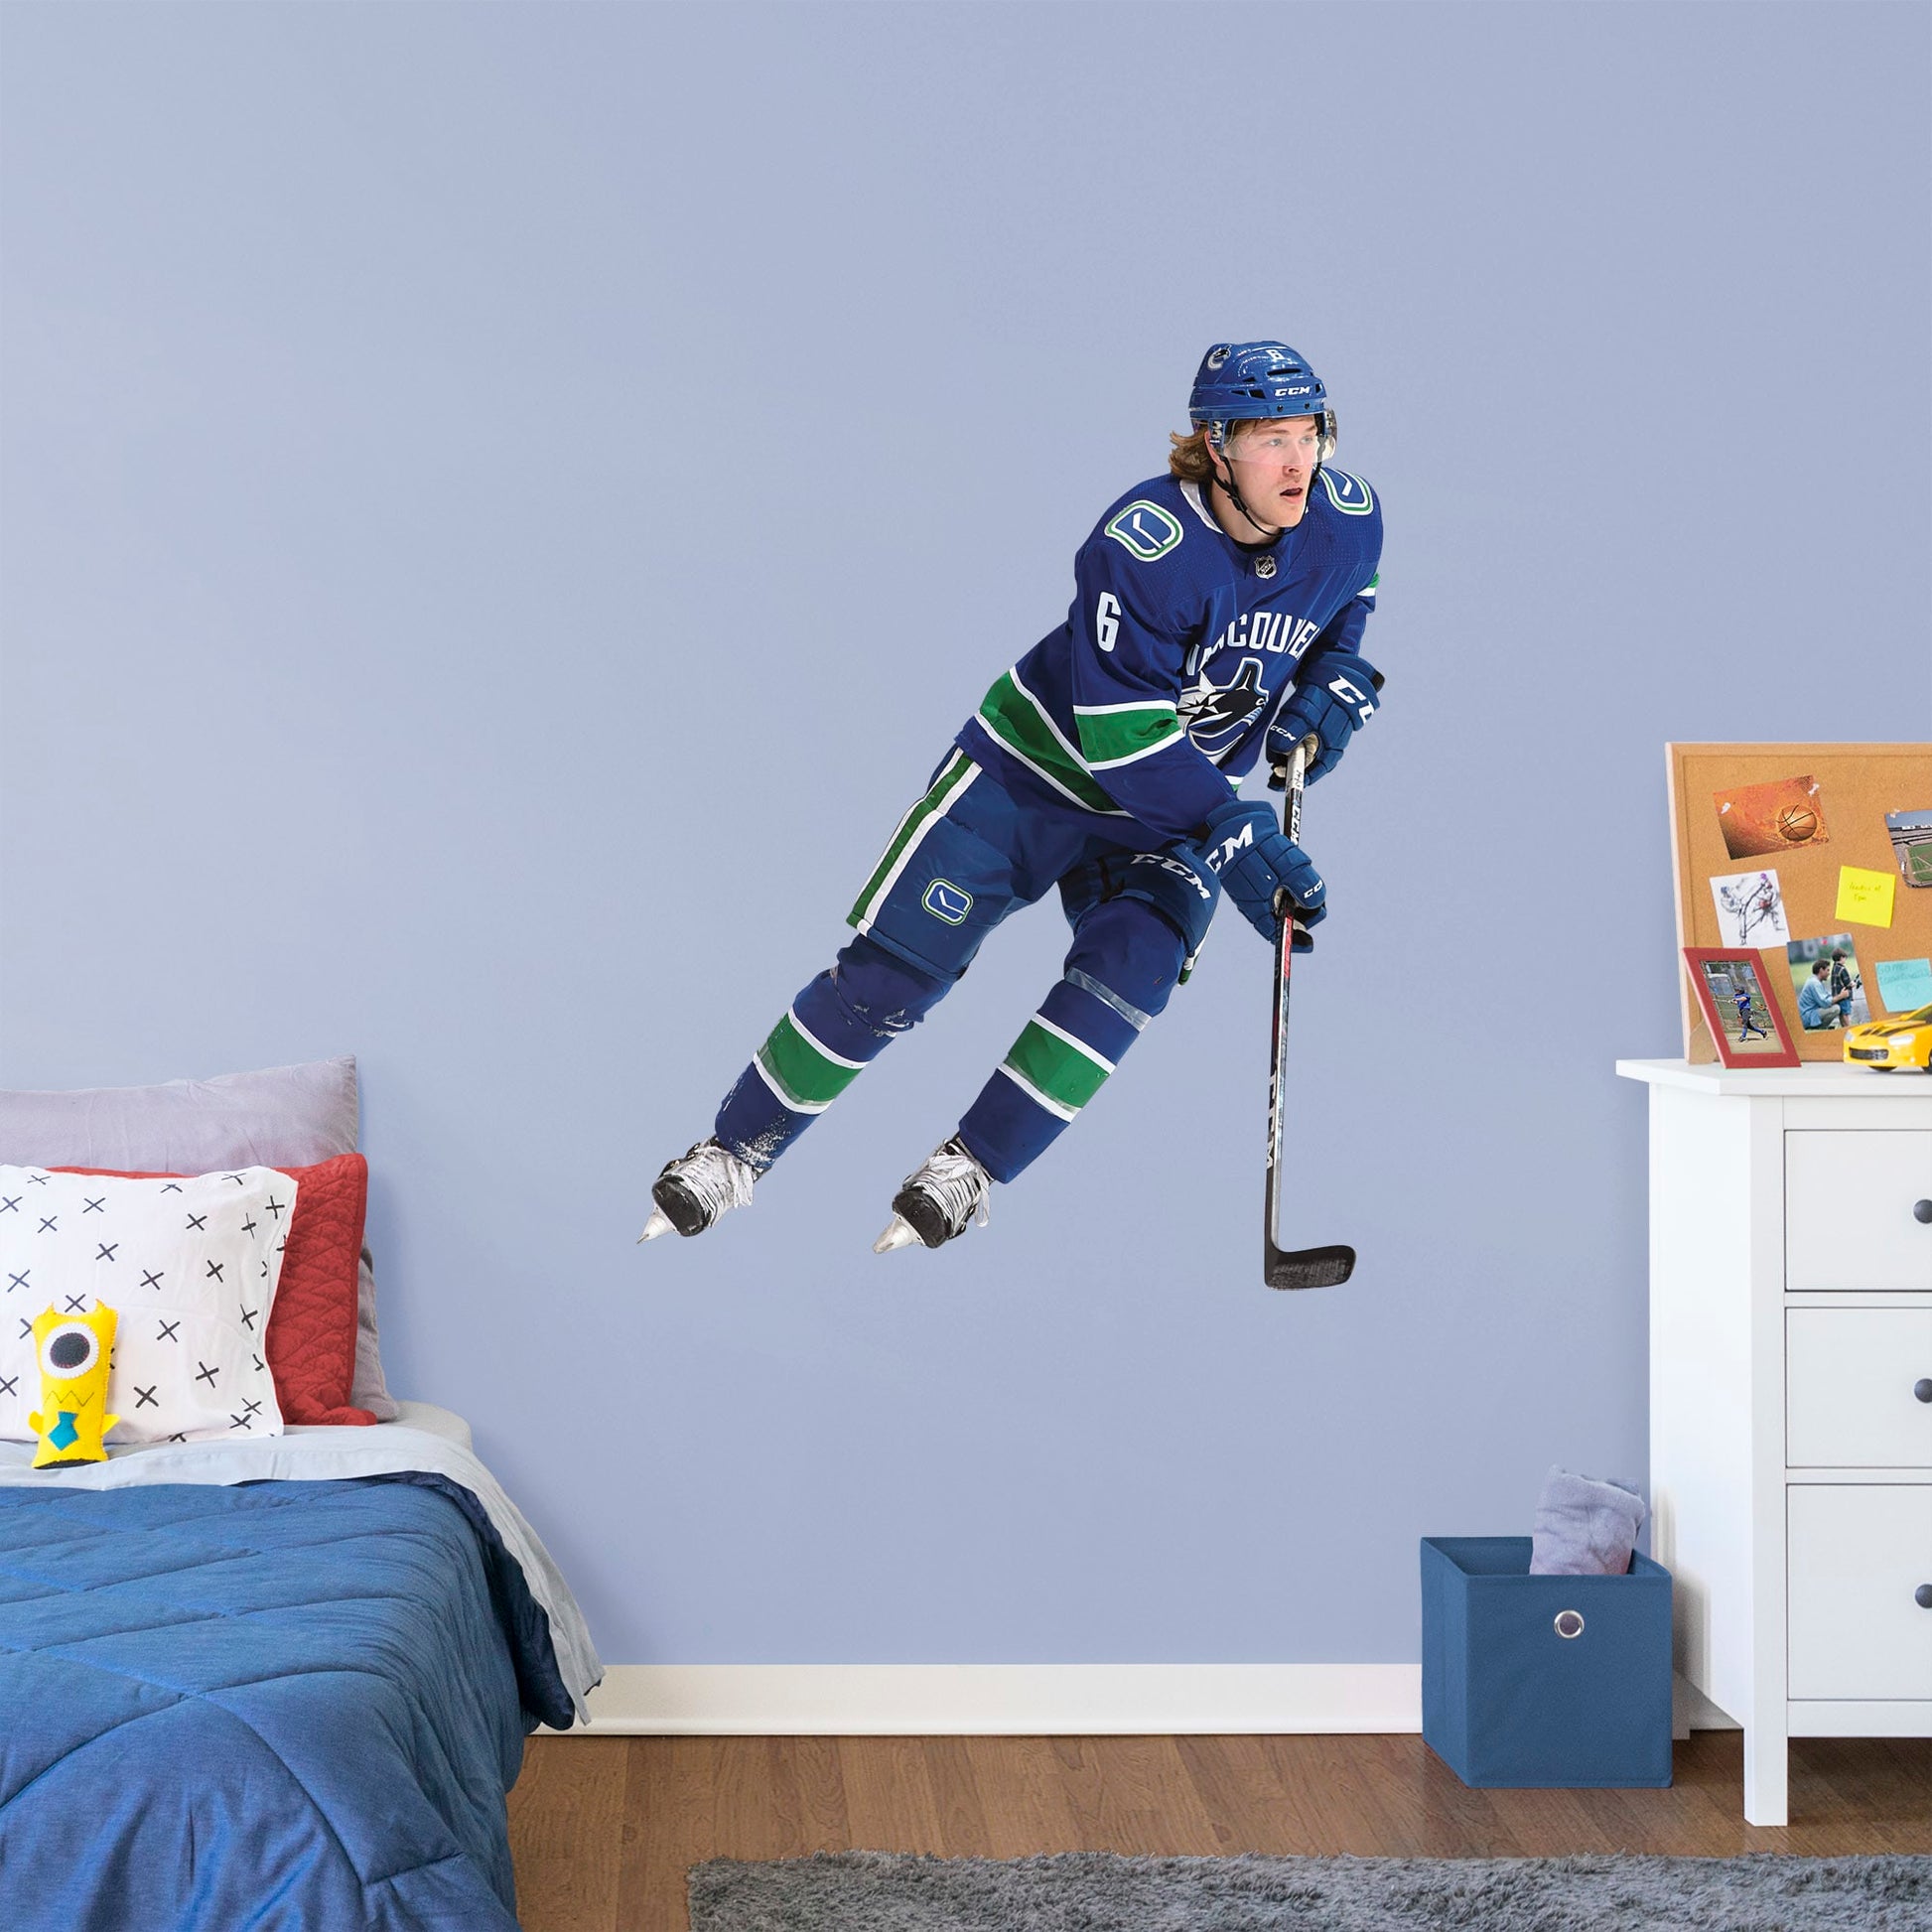 Giant Athlete + 2 Decals (41"W x 51"H) Everyone loves Brock Boeser, the first round pick from the 2015 draft, and now you can bring him to life in your bedroom, office, or fan room with this Officially Licensed NHL Wall Decal. Skating to life in the Canucks home uniform, this removable wall decal of Boeser is sure to bring some action to your home, no matter how many times you need to move and restick it!